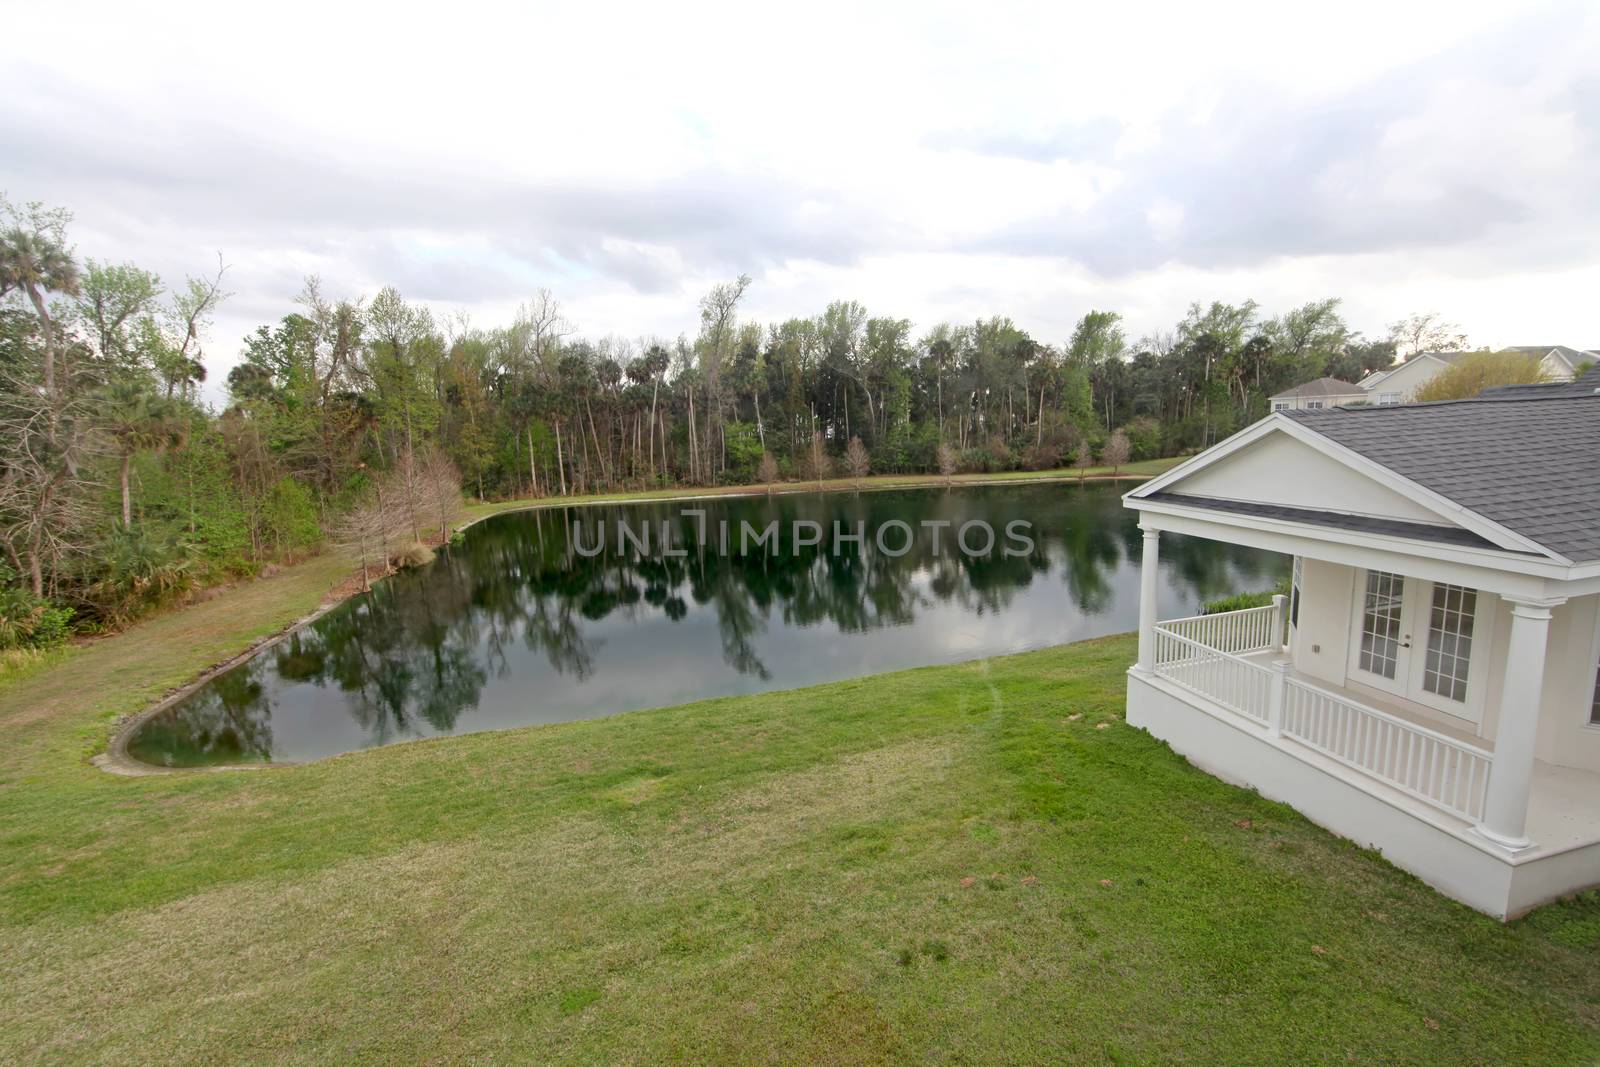 A yard and a pond at a home in Florida